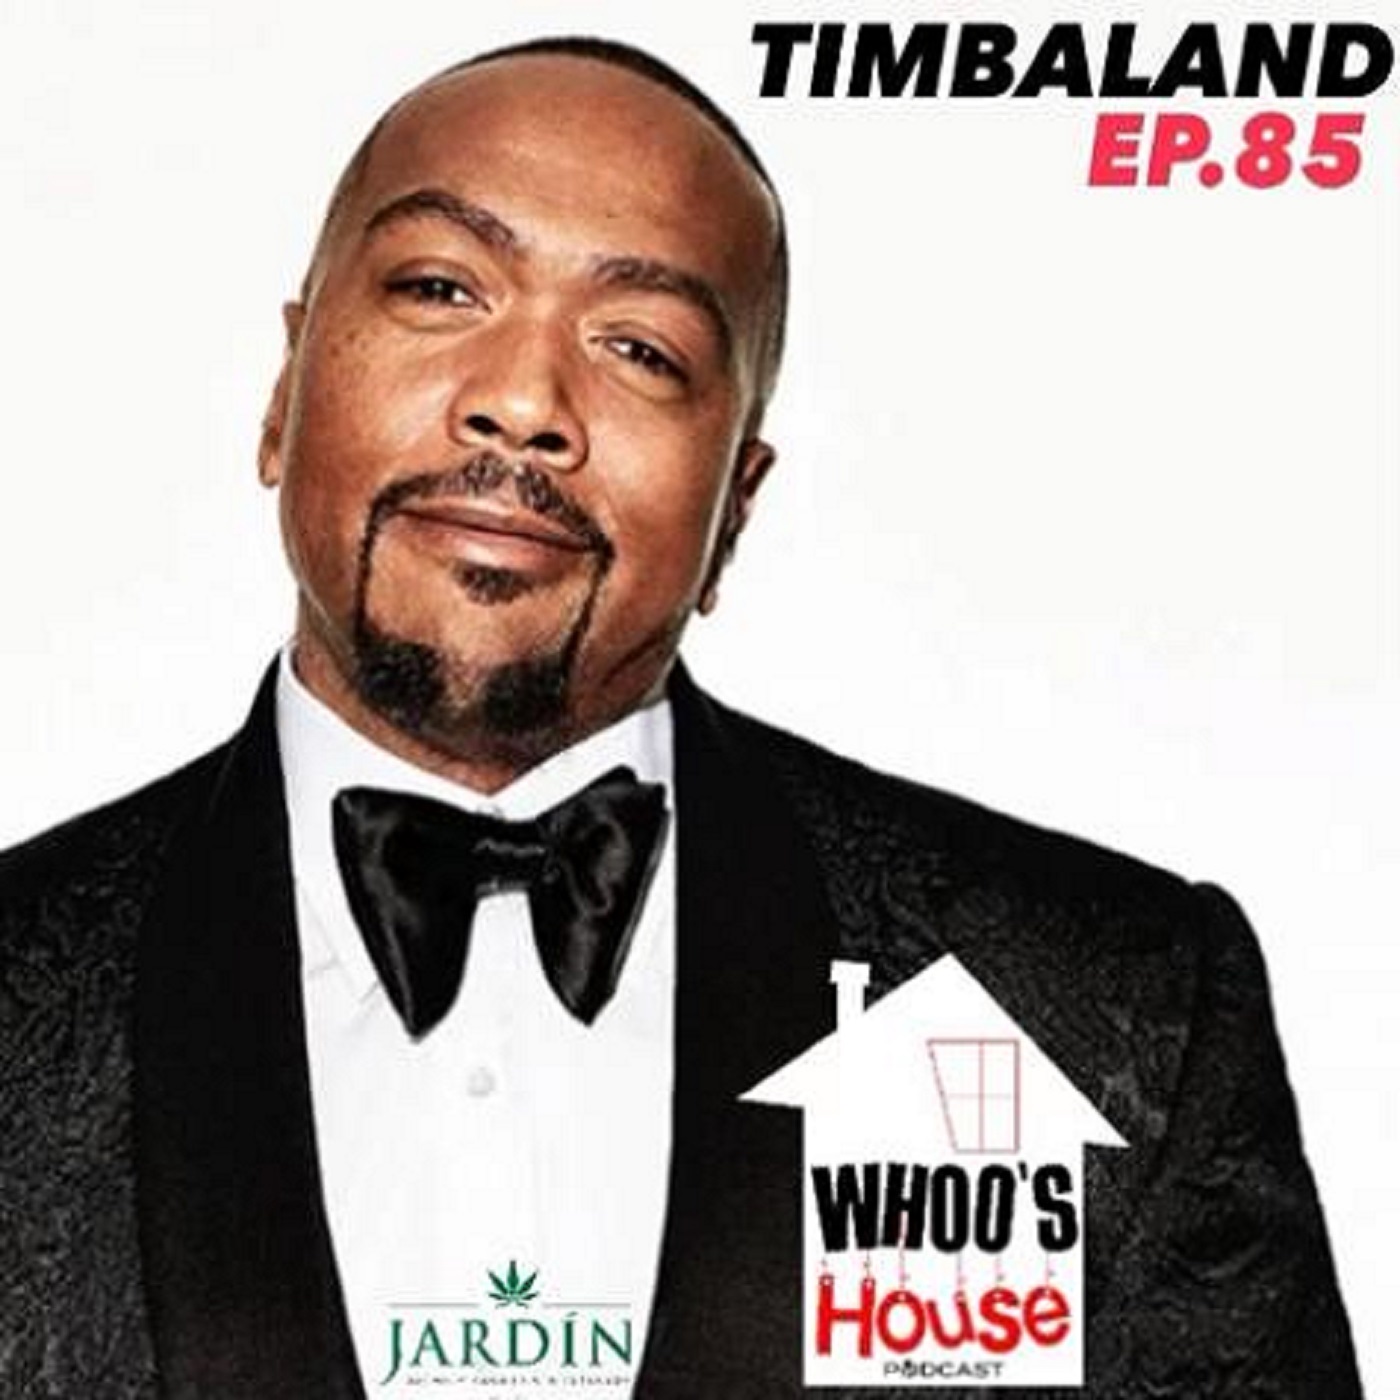 EP 85 Timbaland talks Eminem , Drake , Dr Dre and Jay Z exclusives